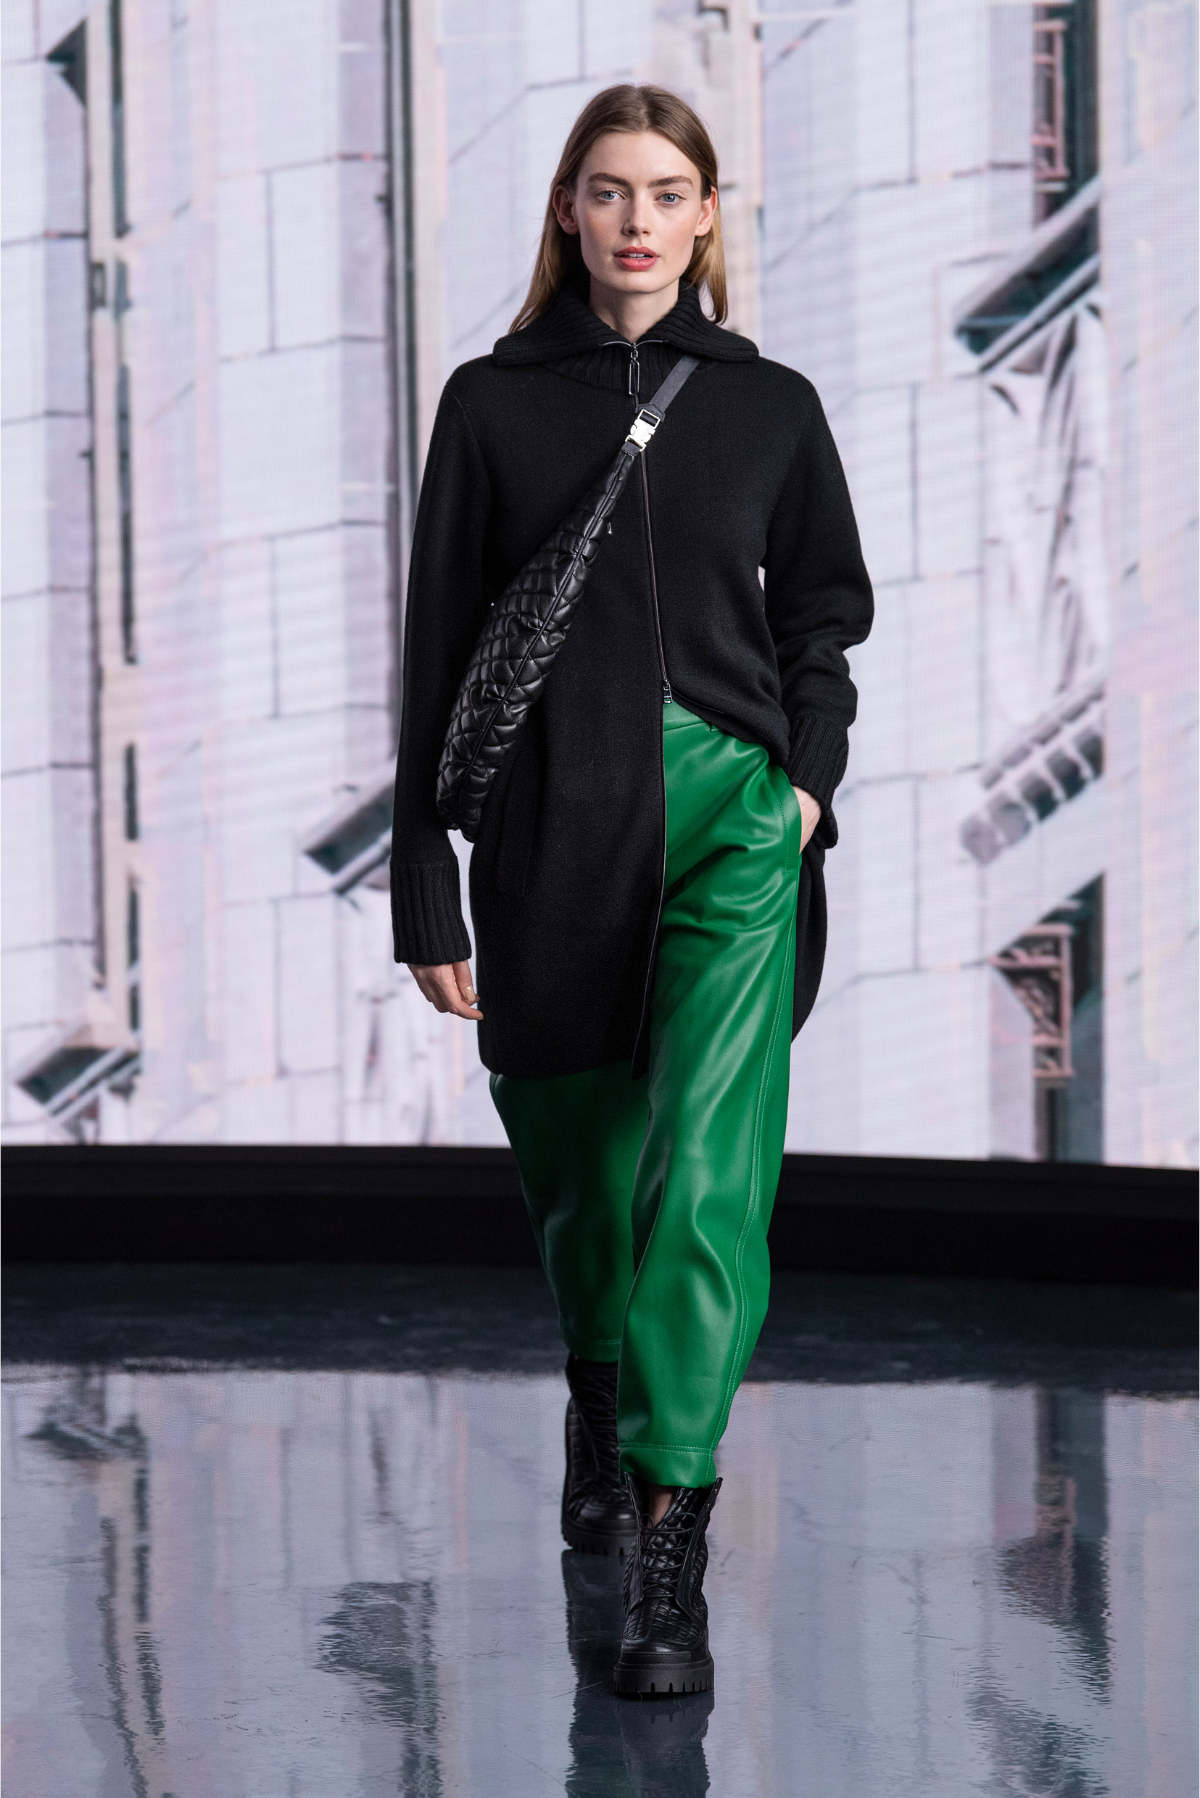 Marc Cain Presents Its Fall Winter 2021 Collection - Luxferity Magazine